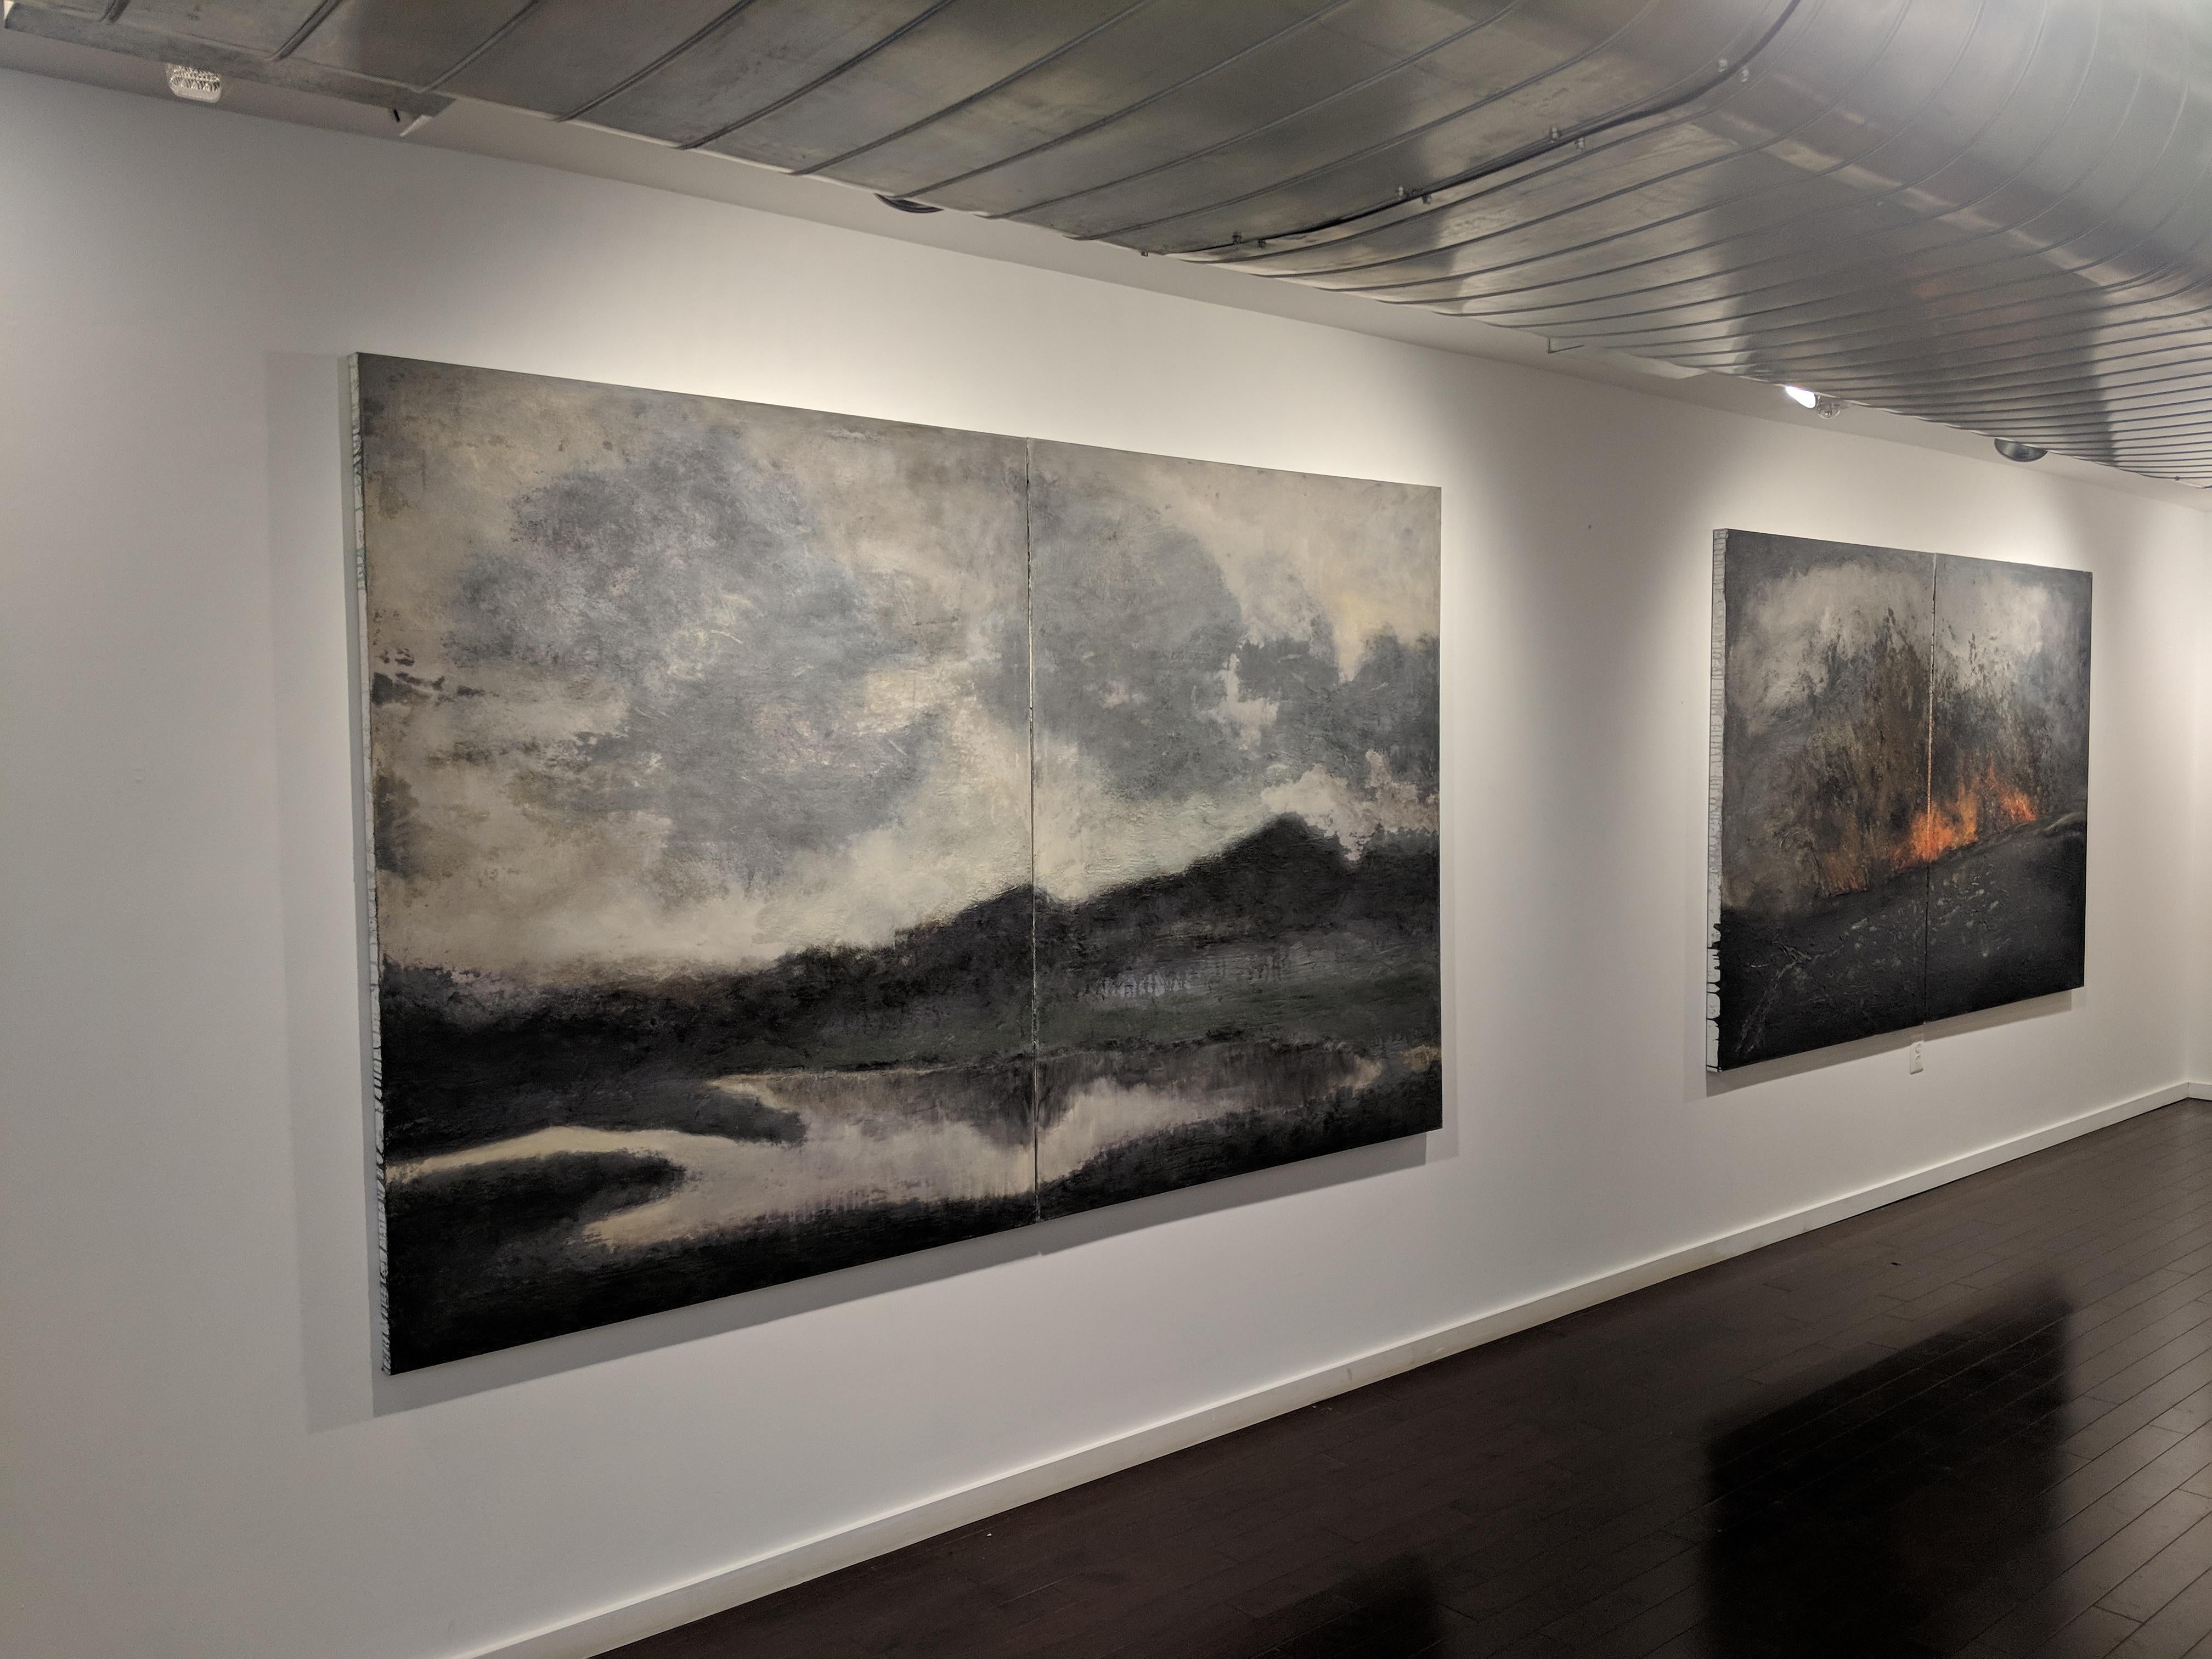 This original painting is created using acrylic paint, charcoal, and elements of the earth on canvas. The painting is stretched on two panels for hassle-free shipment. A certificate of authenticity is included. 

Nenad Zaric's (b. 1986, Valjevo,